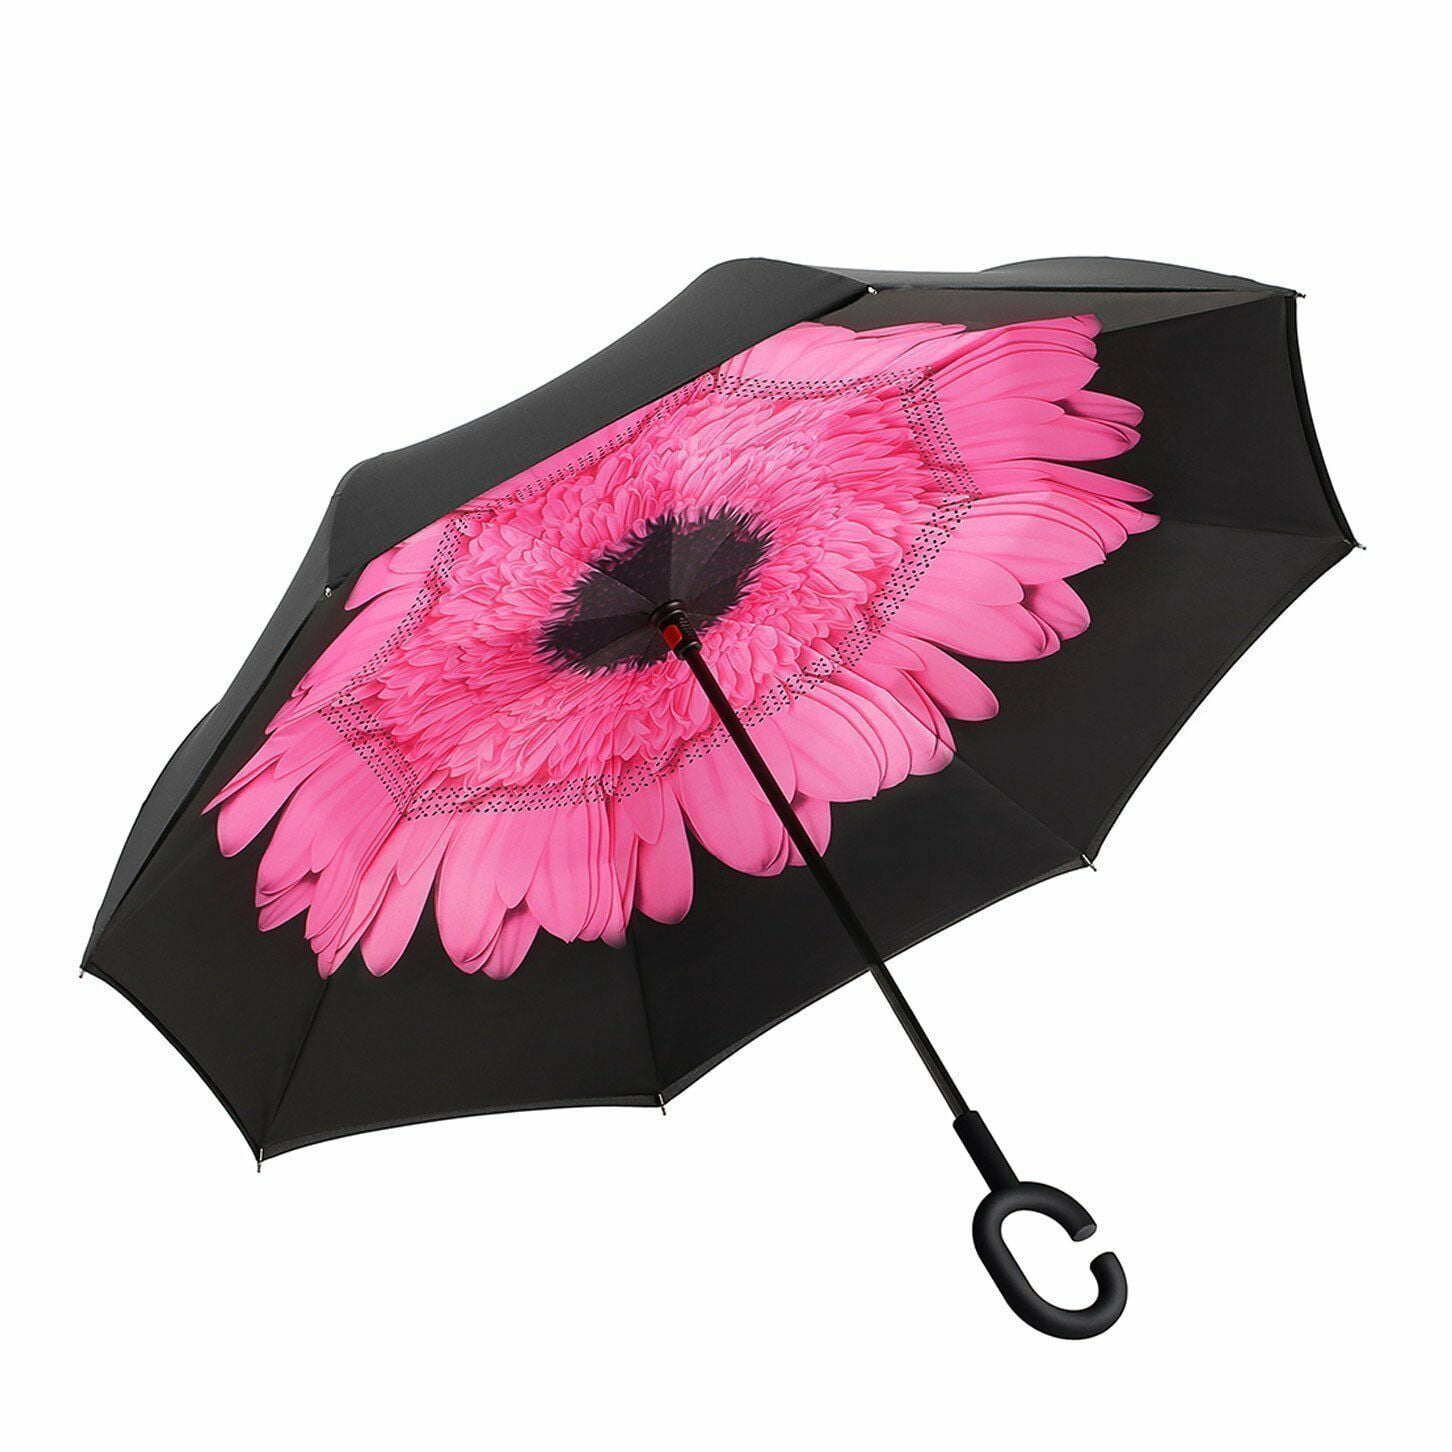 Double Layer Inverted Inverted Umbrella Is Light And Sturdy Close Bright Colorful Feathers Background Reverse Umbrella And Windproof Umbrella Edge Ni 